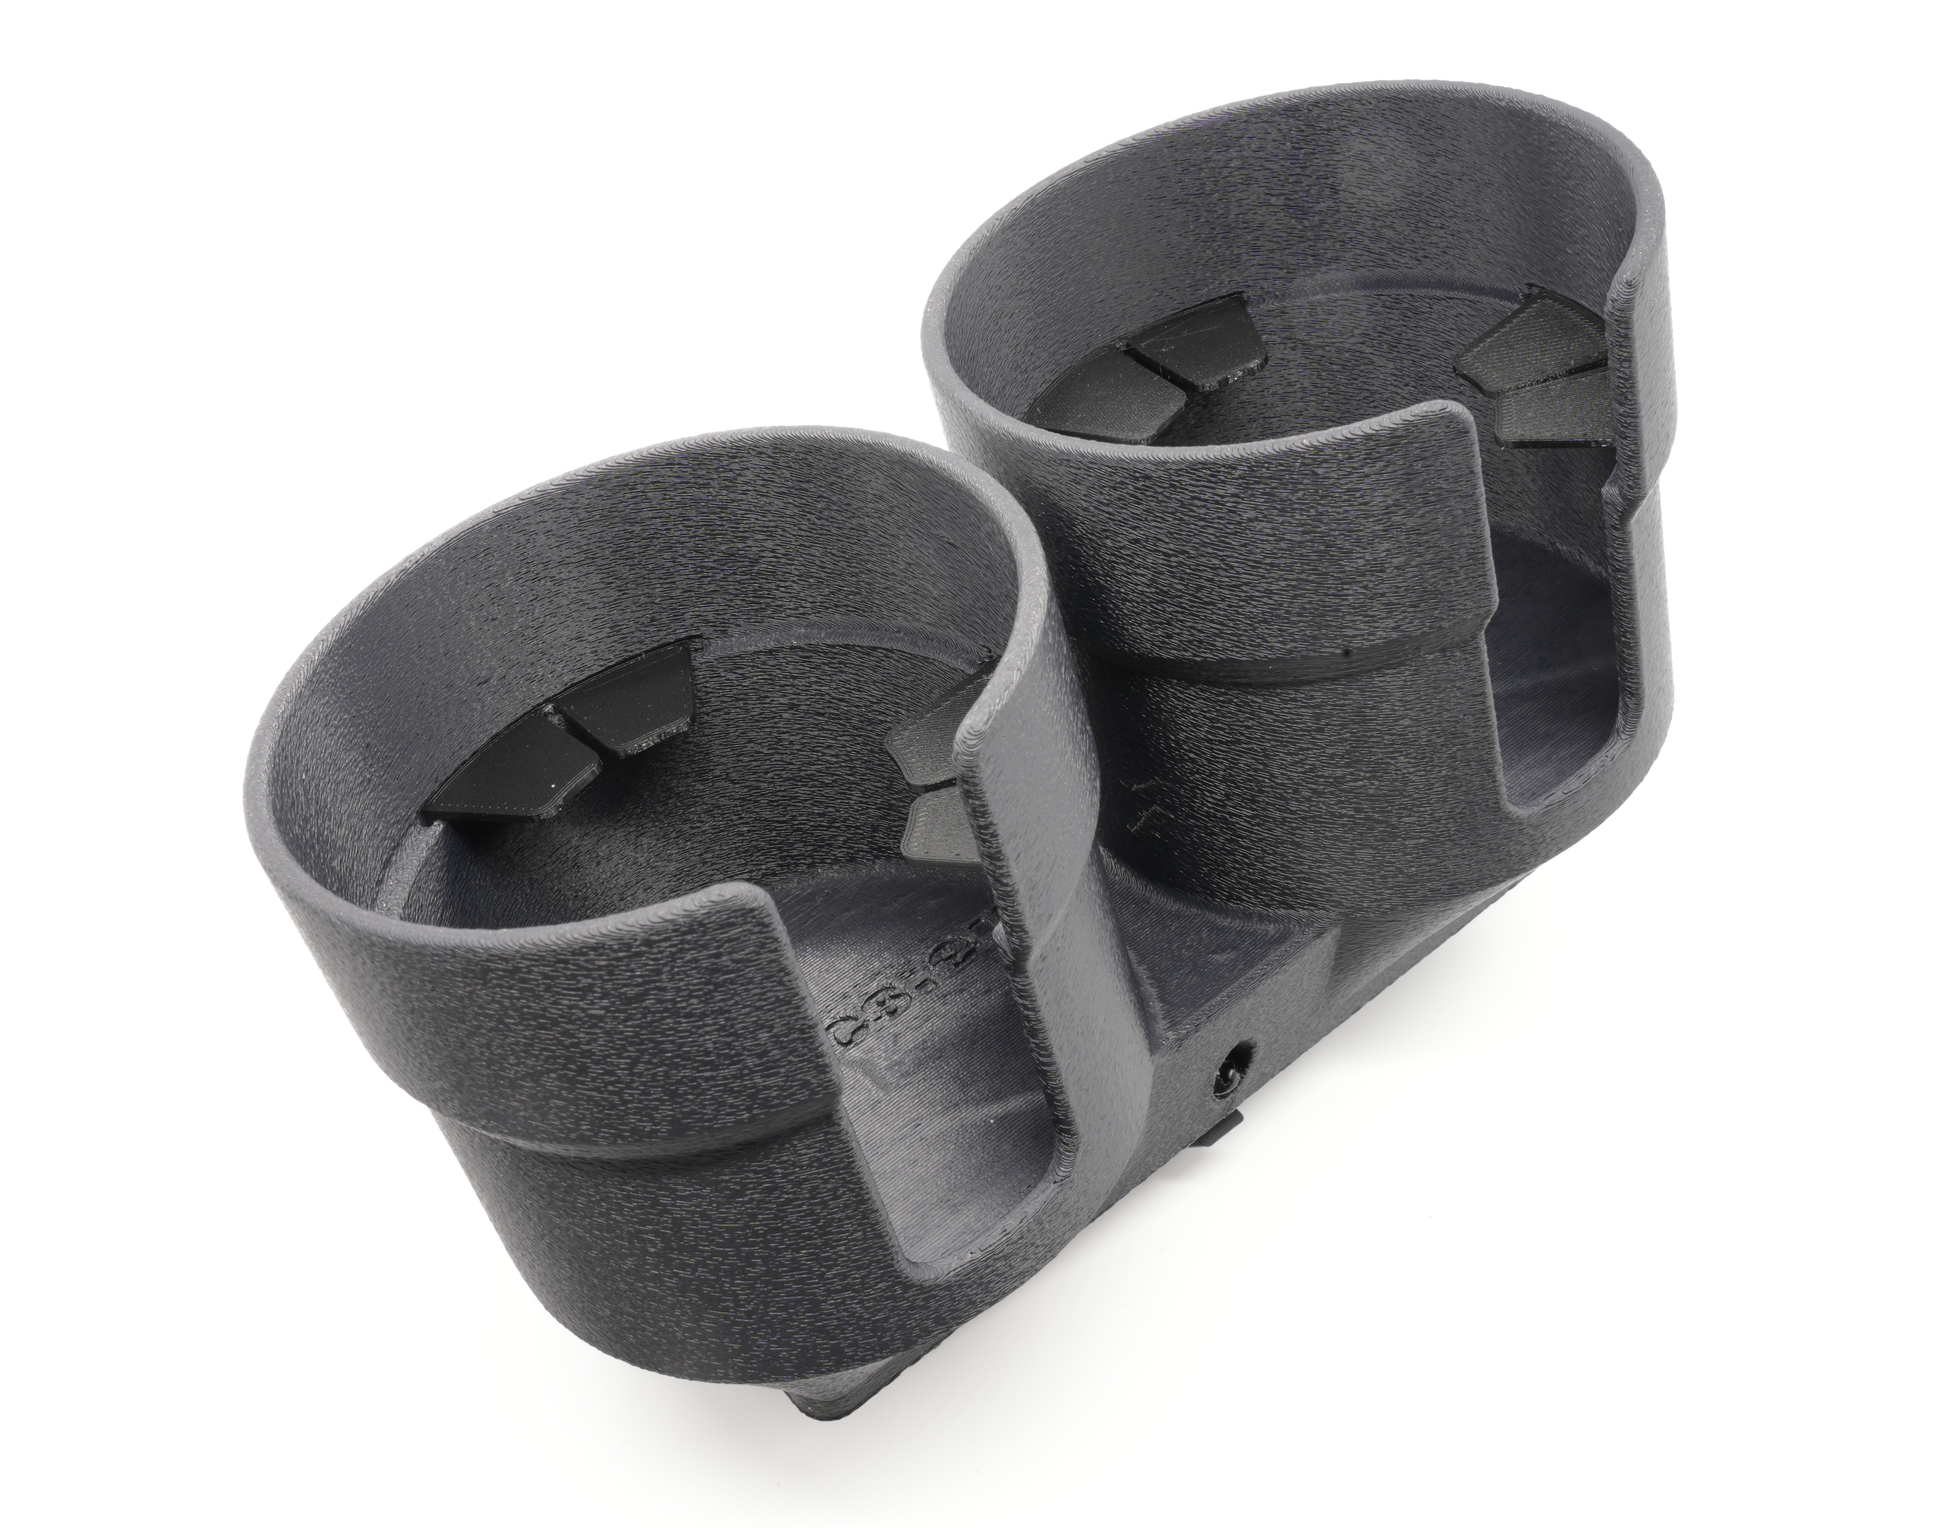 Cup holder T3 for ashtray in the dashboard